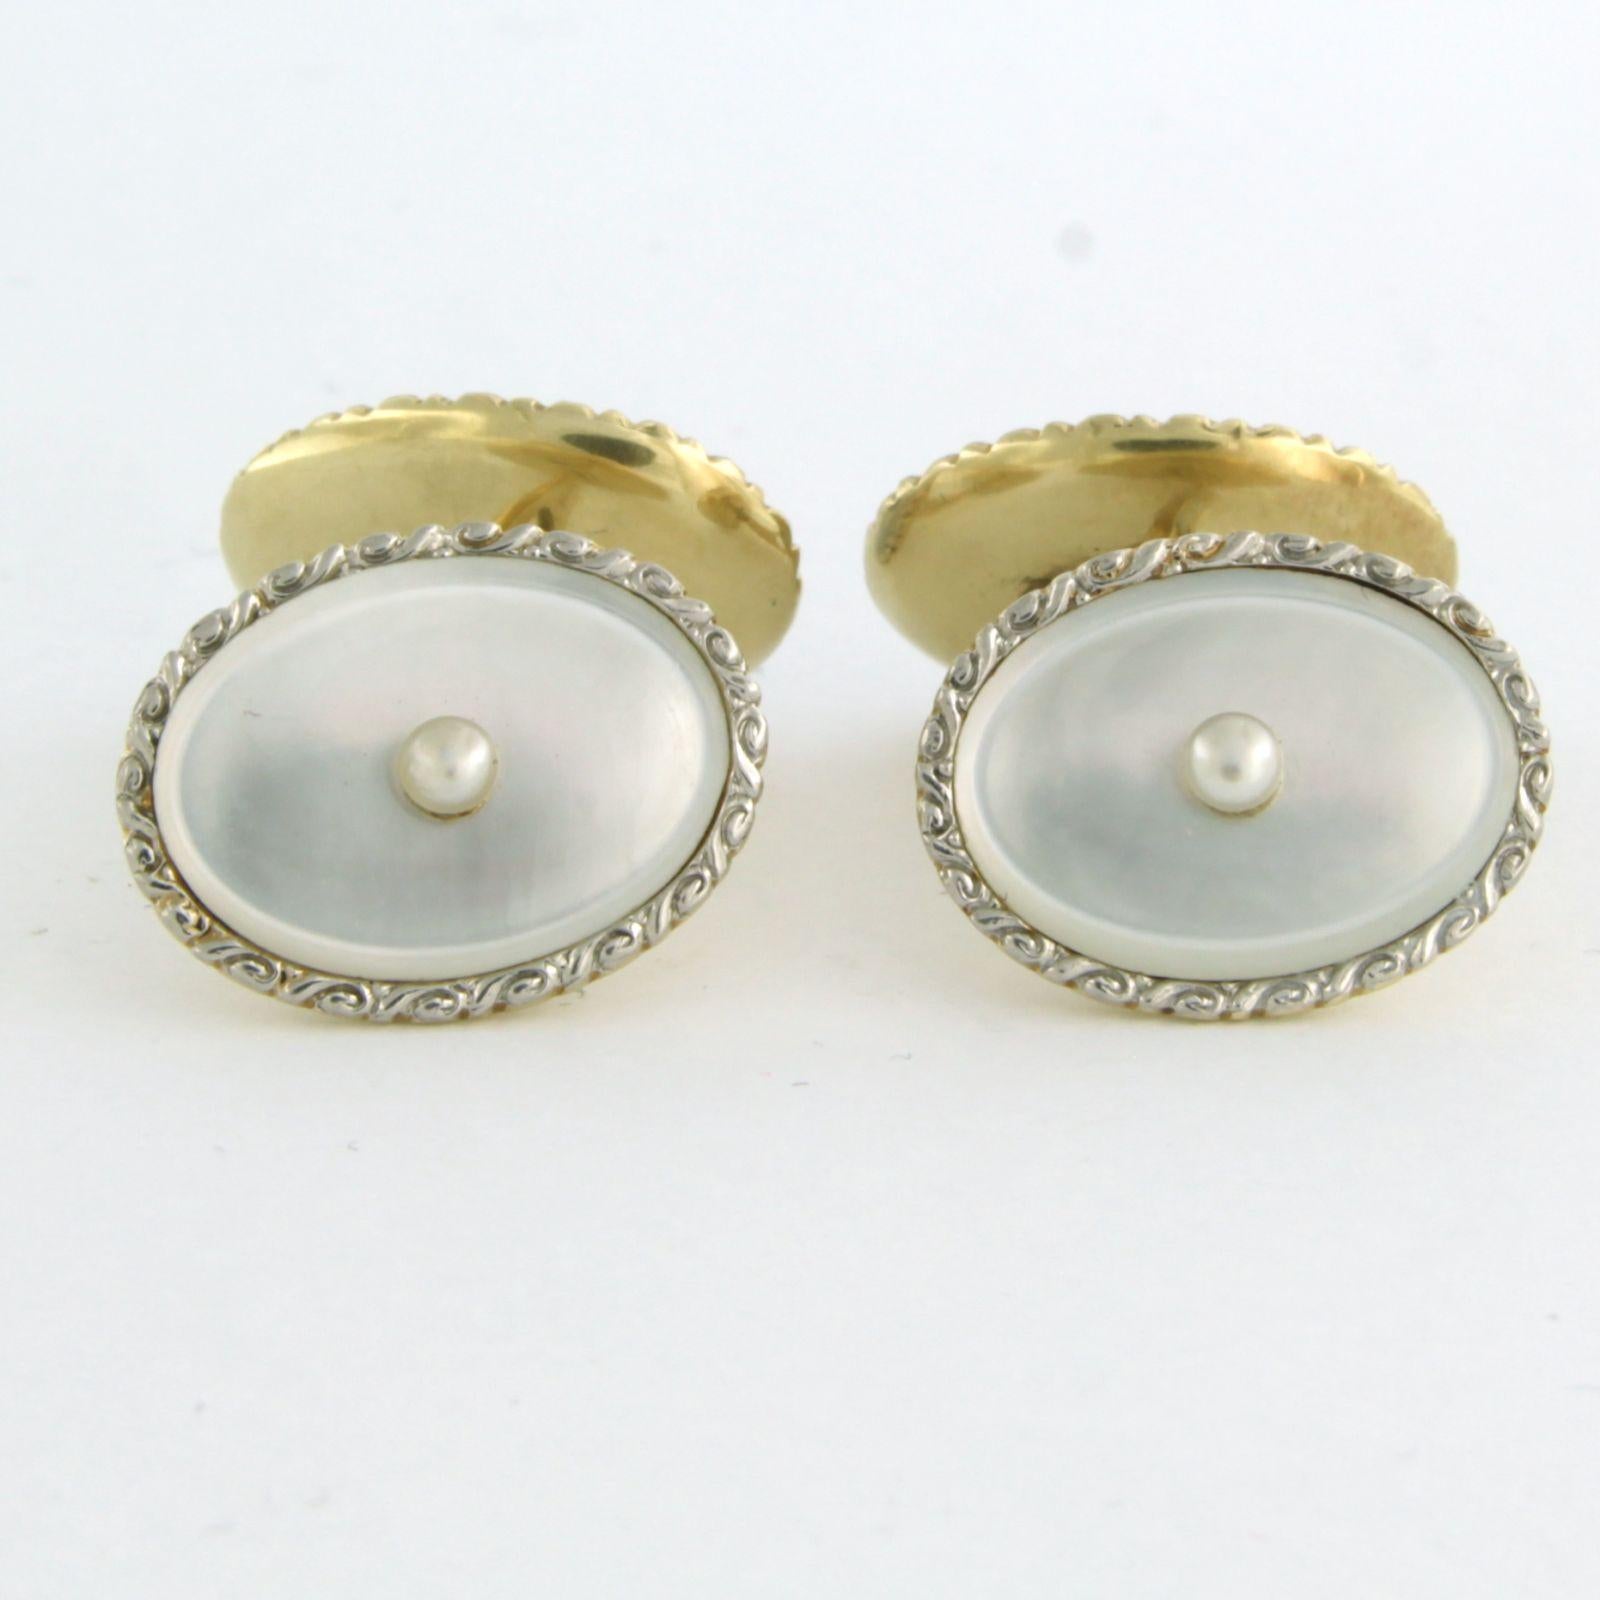 14k bicolour gold cufflinks set with mother of pearl and pearls – in case

Detailed description

the top of the cufflink is in an oval shape and has dimensions of 1.8 cm by 1.4 cm wide

weight 9.3 grams

set with

- 4 x 1.6 cm x 1.2 cm oval cut